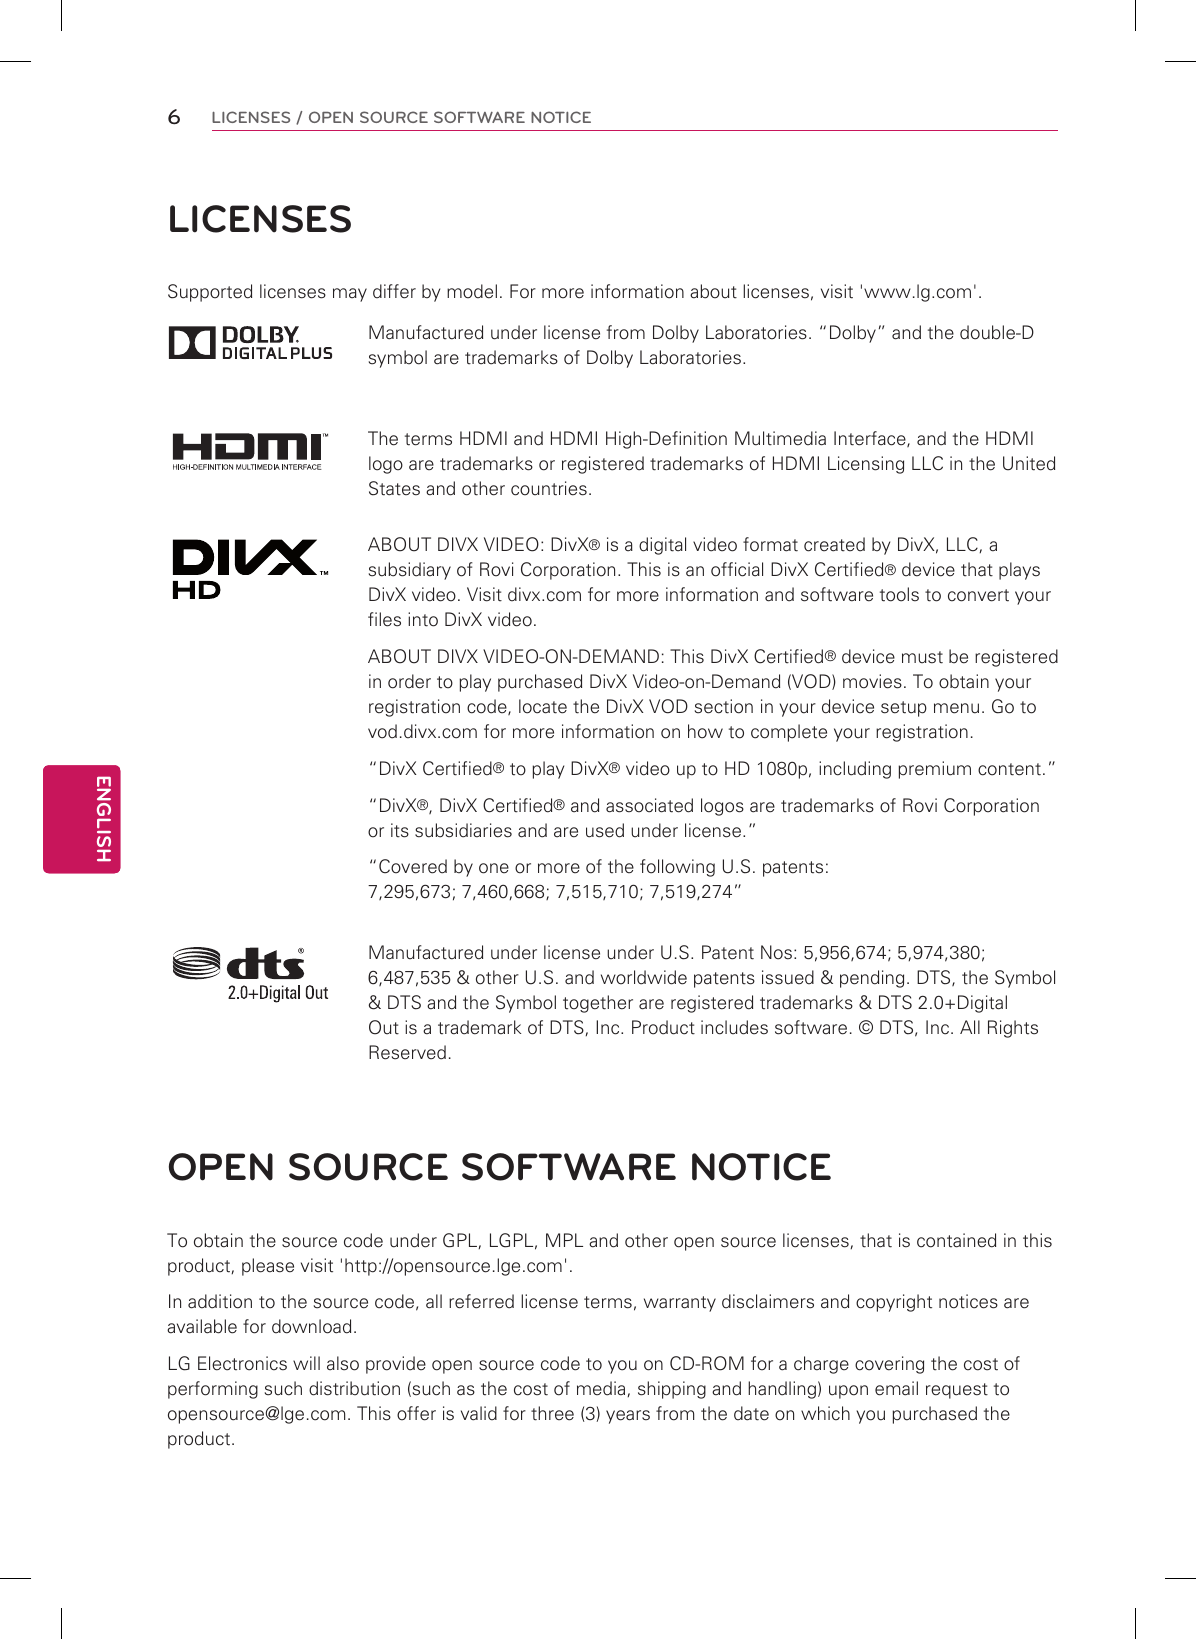 6ENGENGLISHLICENSES / OPEN SOURCE SOFTWARE NOTICELICENSESSupported licenses may differ by model. For more information about licenses, visit &apos;www.lg.com&apos;.Manufactured under license from Dolby Laboratories. “Dolby” and the double-D symbol are trademarks of Dolby Laboratories.The terms HDMI and HDMI High-Definition Multimedia Interface, and the HDMI logo are trademarks or registered trademarks of HDMI Licensing LLC in the United States and other countries.ABOUT DIVX VIDEO: DivX® is a digital video format created by DivX, LLC, a subsidiary of Rovi Corporation. This is an official DivX Certified® device that plays DivX video. Visit divx.com for more information and software tools to convert your files into DivX video.ABOUT DIVX VIDEO-ON-DEMAND: This DivX Certified® device must be registered in order to play purchased DivX Video-on-Demand (VOD) movies. To obtain your registration code, locate the DivX VOD section in your device setup menu. Go to vod.divx.com for more information on how to complete your registration. “DivX Certified® to play DivX® video up to HD 1080p, including premium content.”“DivX®, DivX Certified® and associated logos are trademarks of Rovi Corporation or its subsidiaries and are used under license.”“Covered by one or more of the following U.S. patents: 7,295,673; 7,460,668; 7,515,710; 7,519,274”Manufactured under license under U.S. Patent Nos: 5,956,674; 5,974,380; 6,487,535 &amp; other U.S. and worldwide patents issued &amp; pending. DTS, the Symbol &amp; DTS and the Symbol together are registered trademarks &amp; DTS 2.0+Digital Out is a trademark of DTS, Inc. Product includes software. © DTS, Inc. All Rights Reserved.OPEN SOURCE SOFTWARE NOTICETo obtain the source code under GPL, LGPL, MPL and other open source licenses, that is contained in this product, please visit &apos;http://opensource.lge.com&apos;.In addition to the source code, all referred license terms, warranty disclaimers and copyright notices are available for download.LG Electronics will also provide open source code to you on CD-ROM for a charge covering the cost of performing such distribution (such as the cost of media, shipping and handling) upon email request to opensource@lge.com. This offer is valid for three (3) years from the date on which you purchased the product.